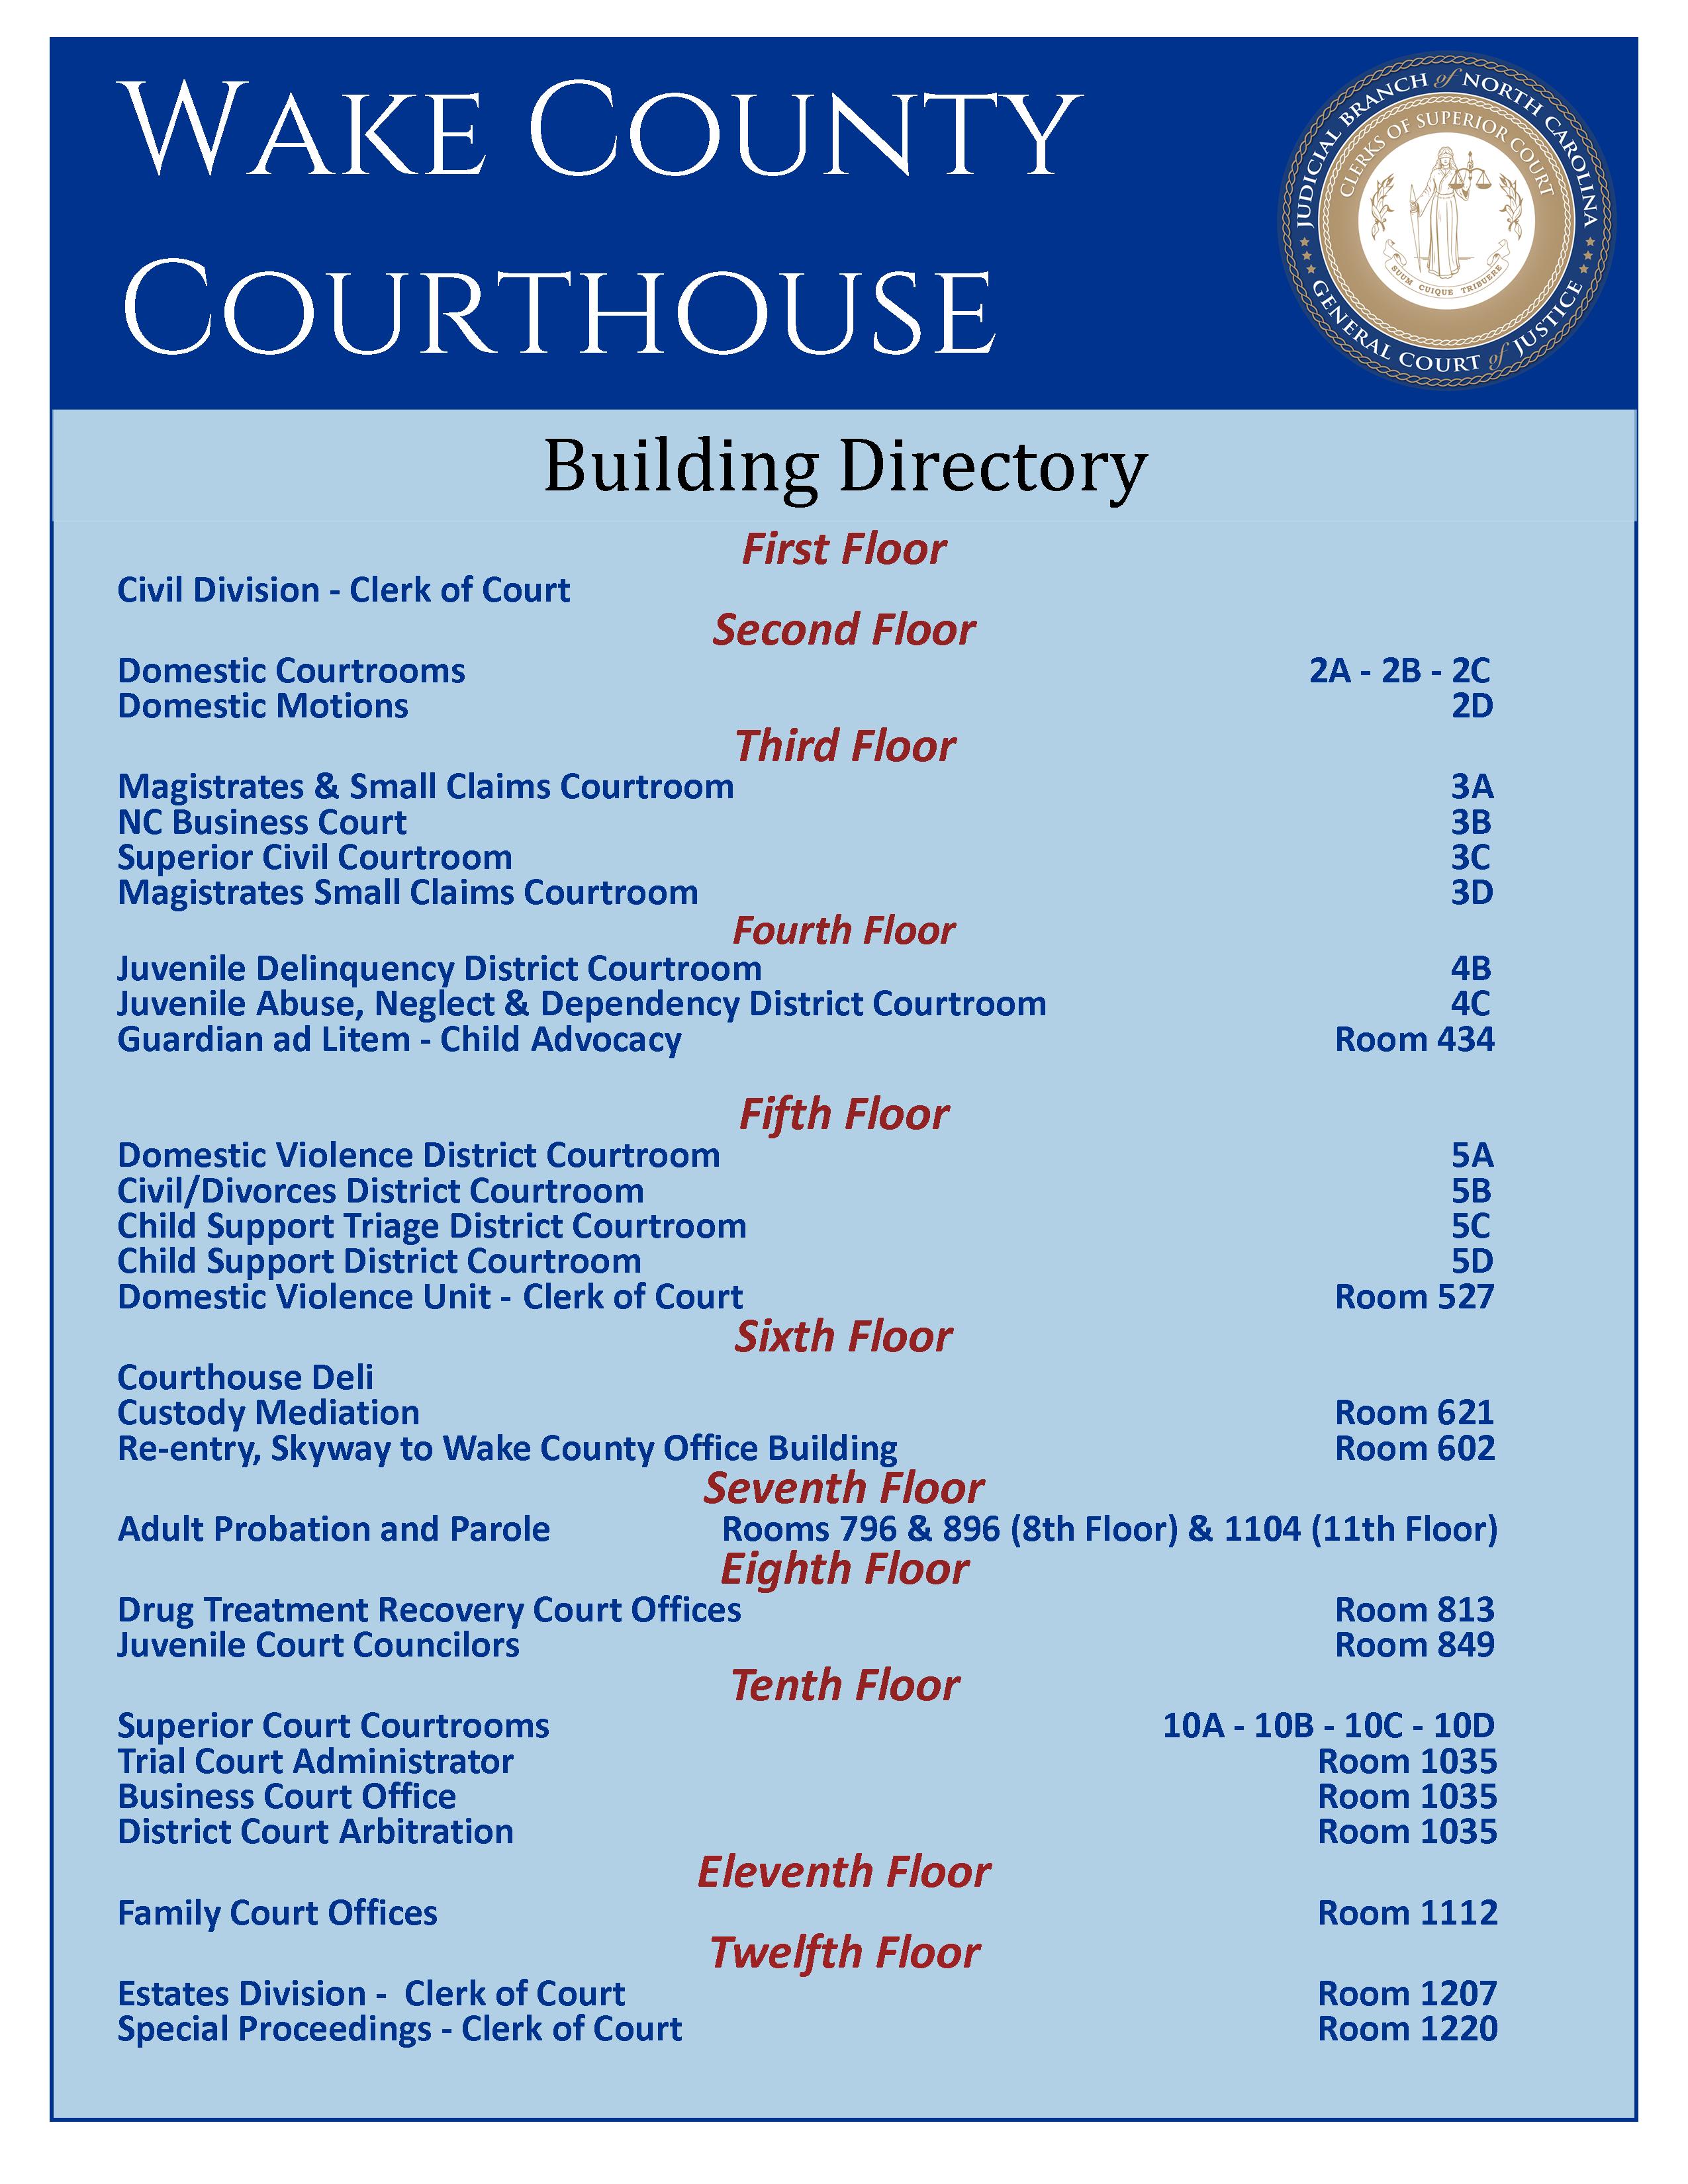 Wake County Courthouse Building Directory